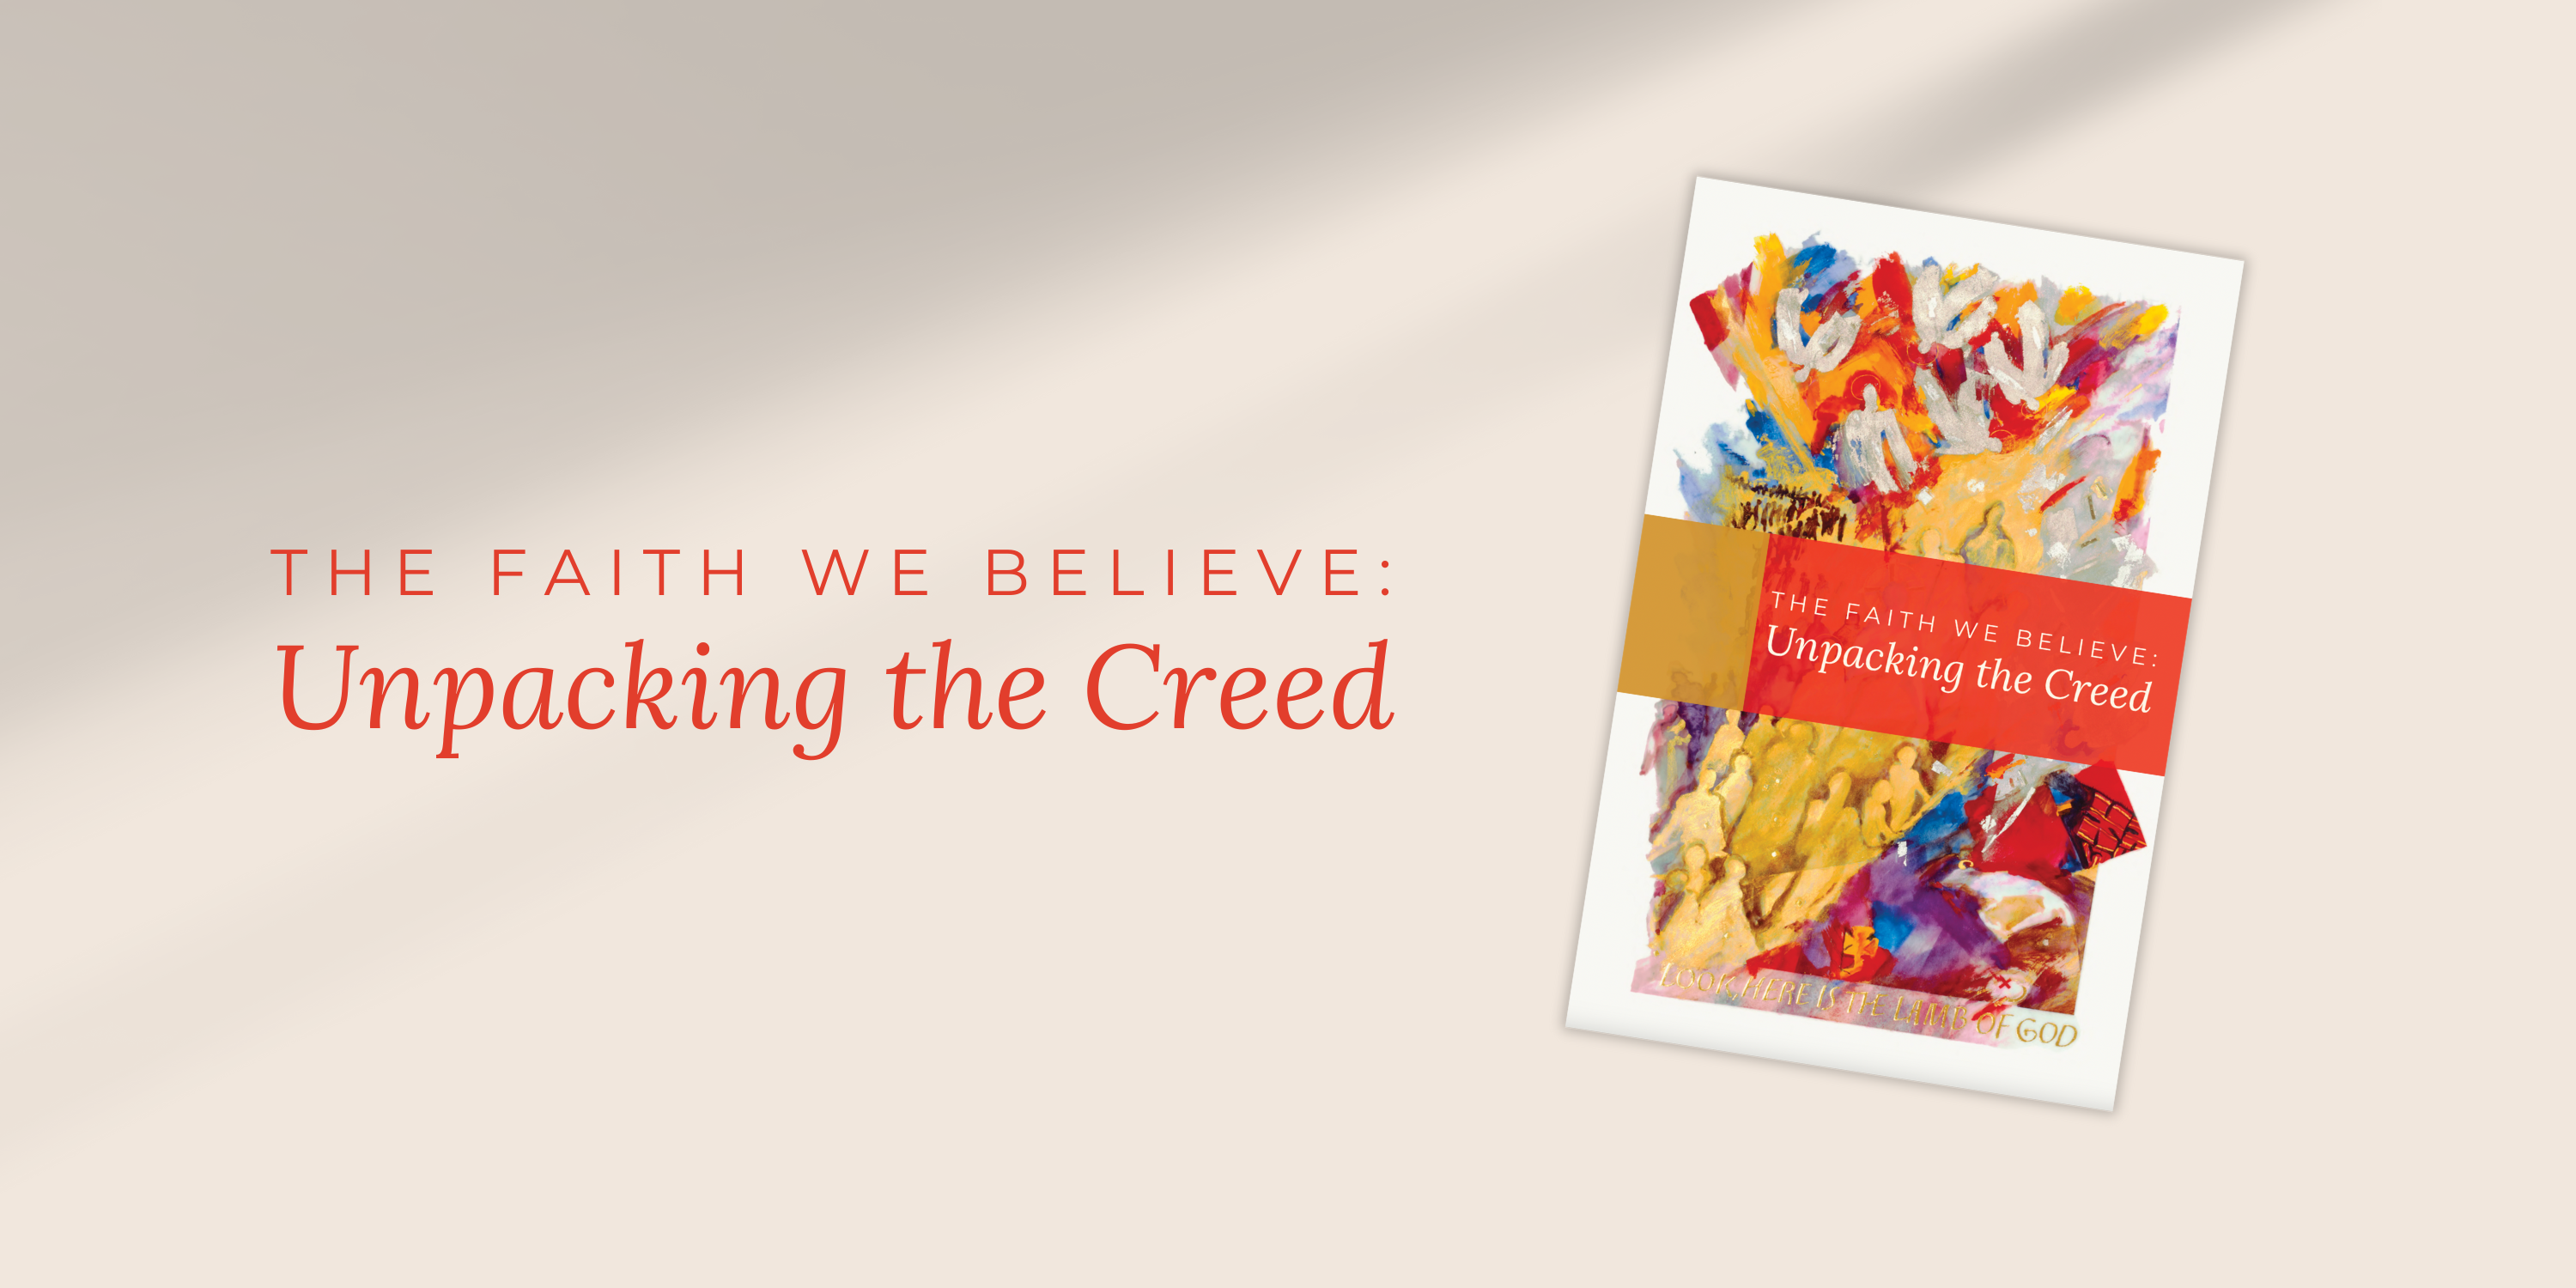 THE FAITH WE BELIEVE: Unpacking the Creed